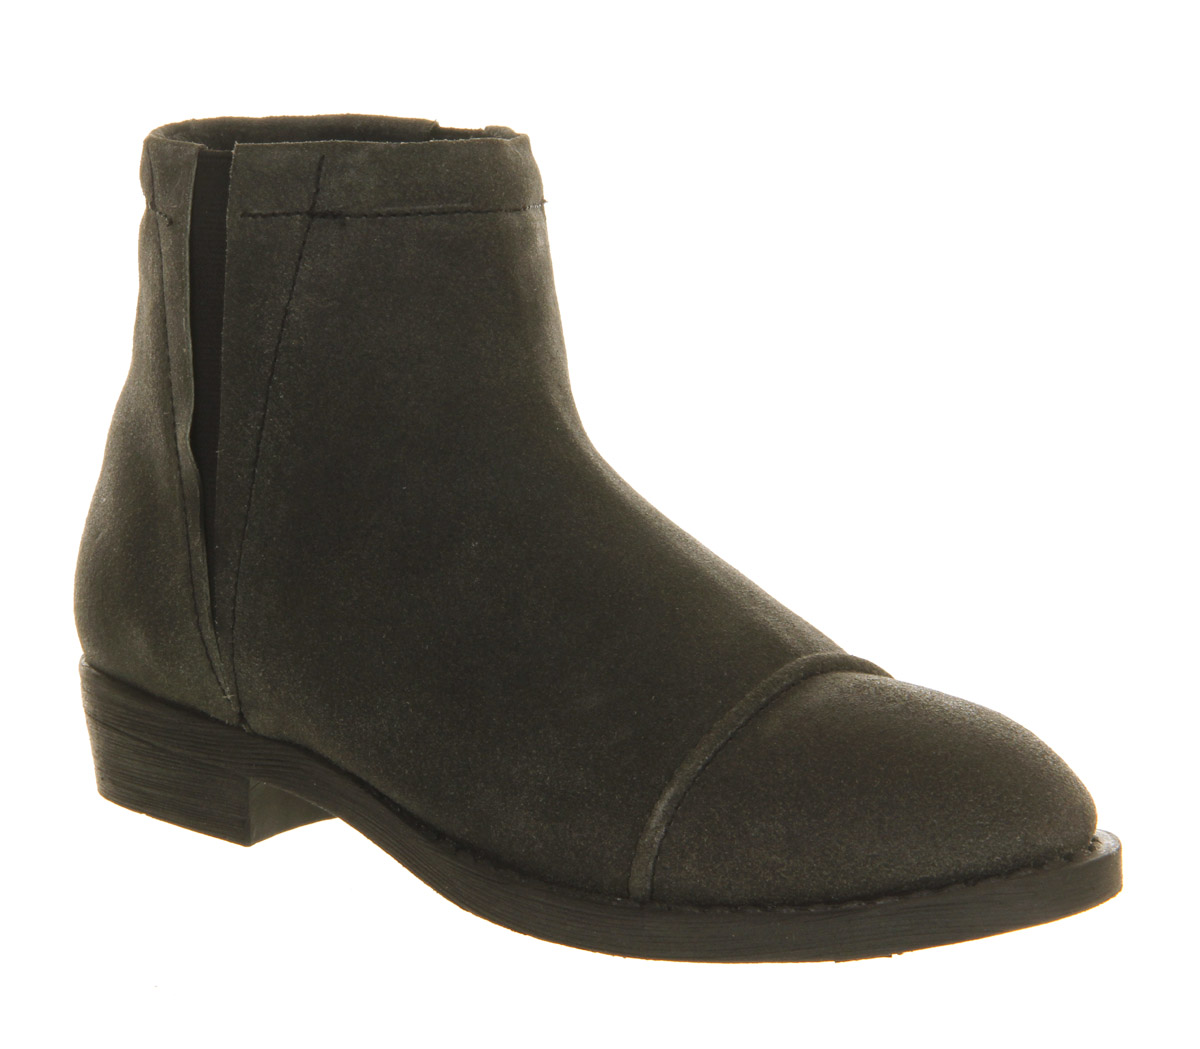 Friis & CoKimi Ankle BootCracked Leather